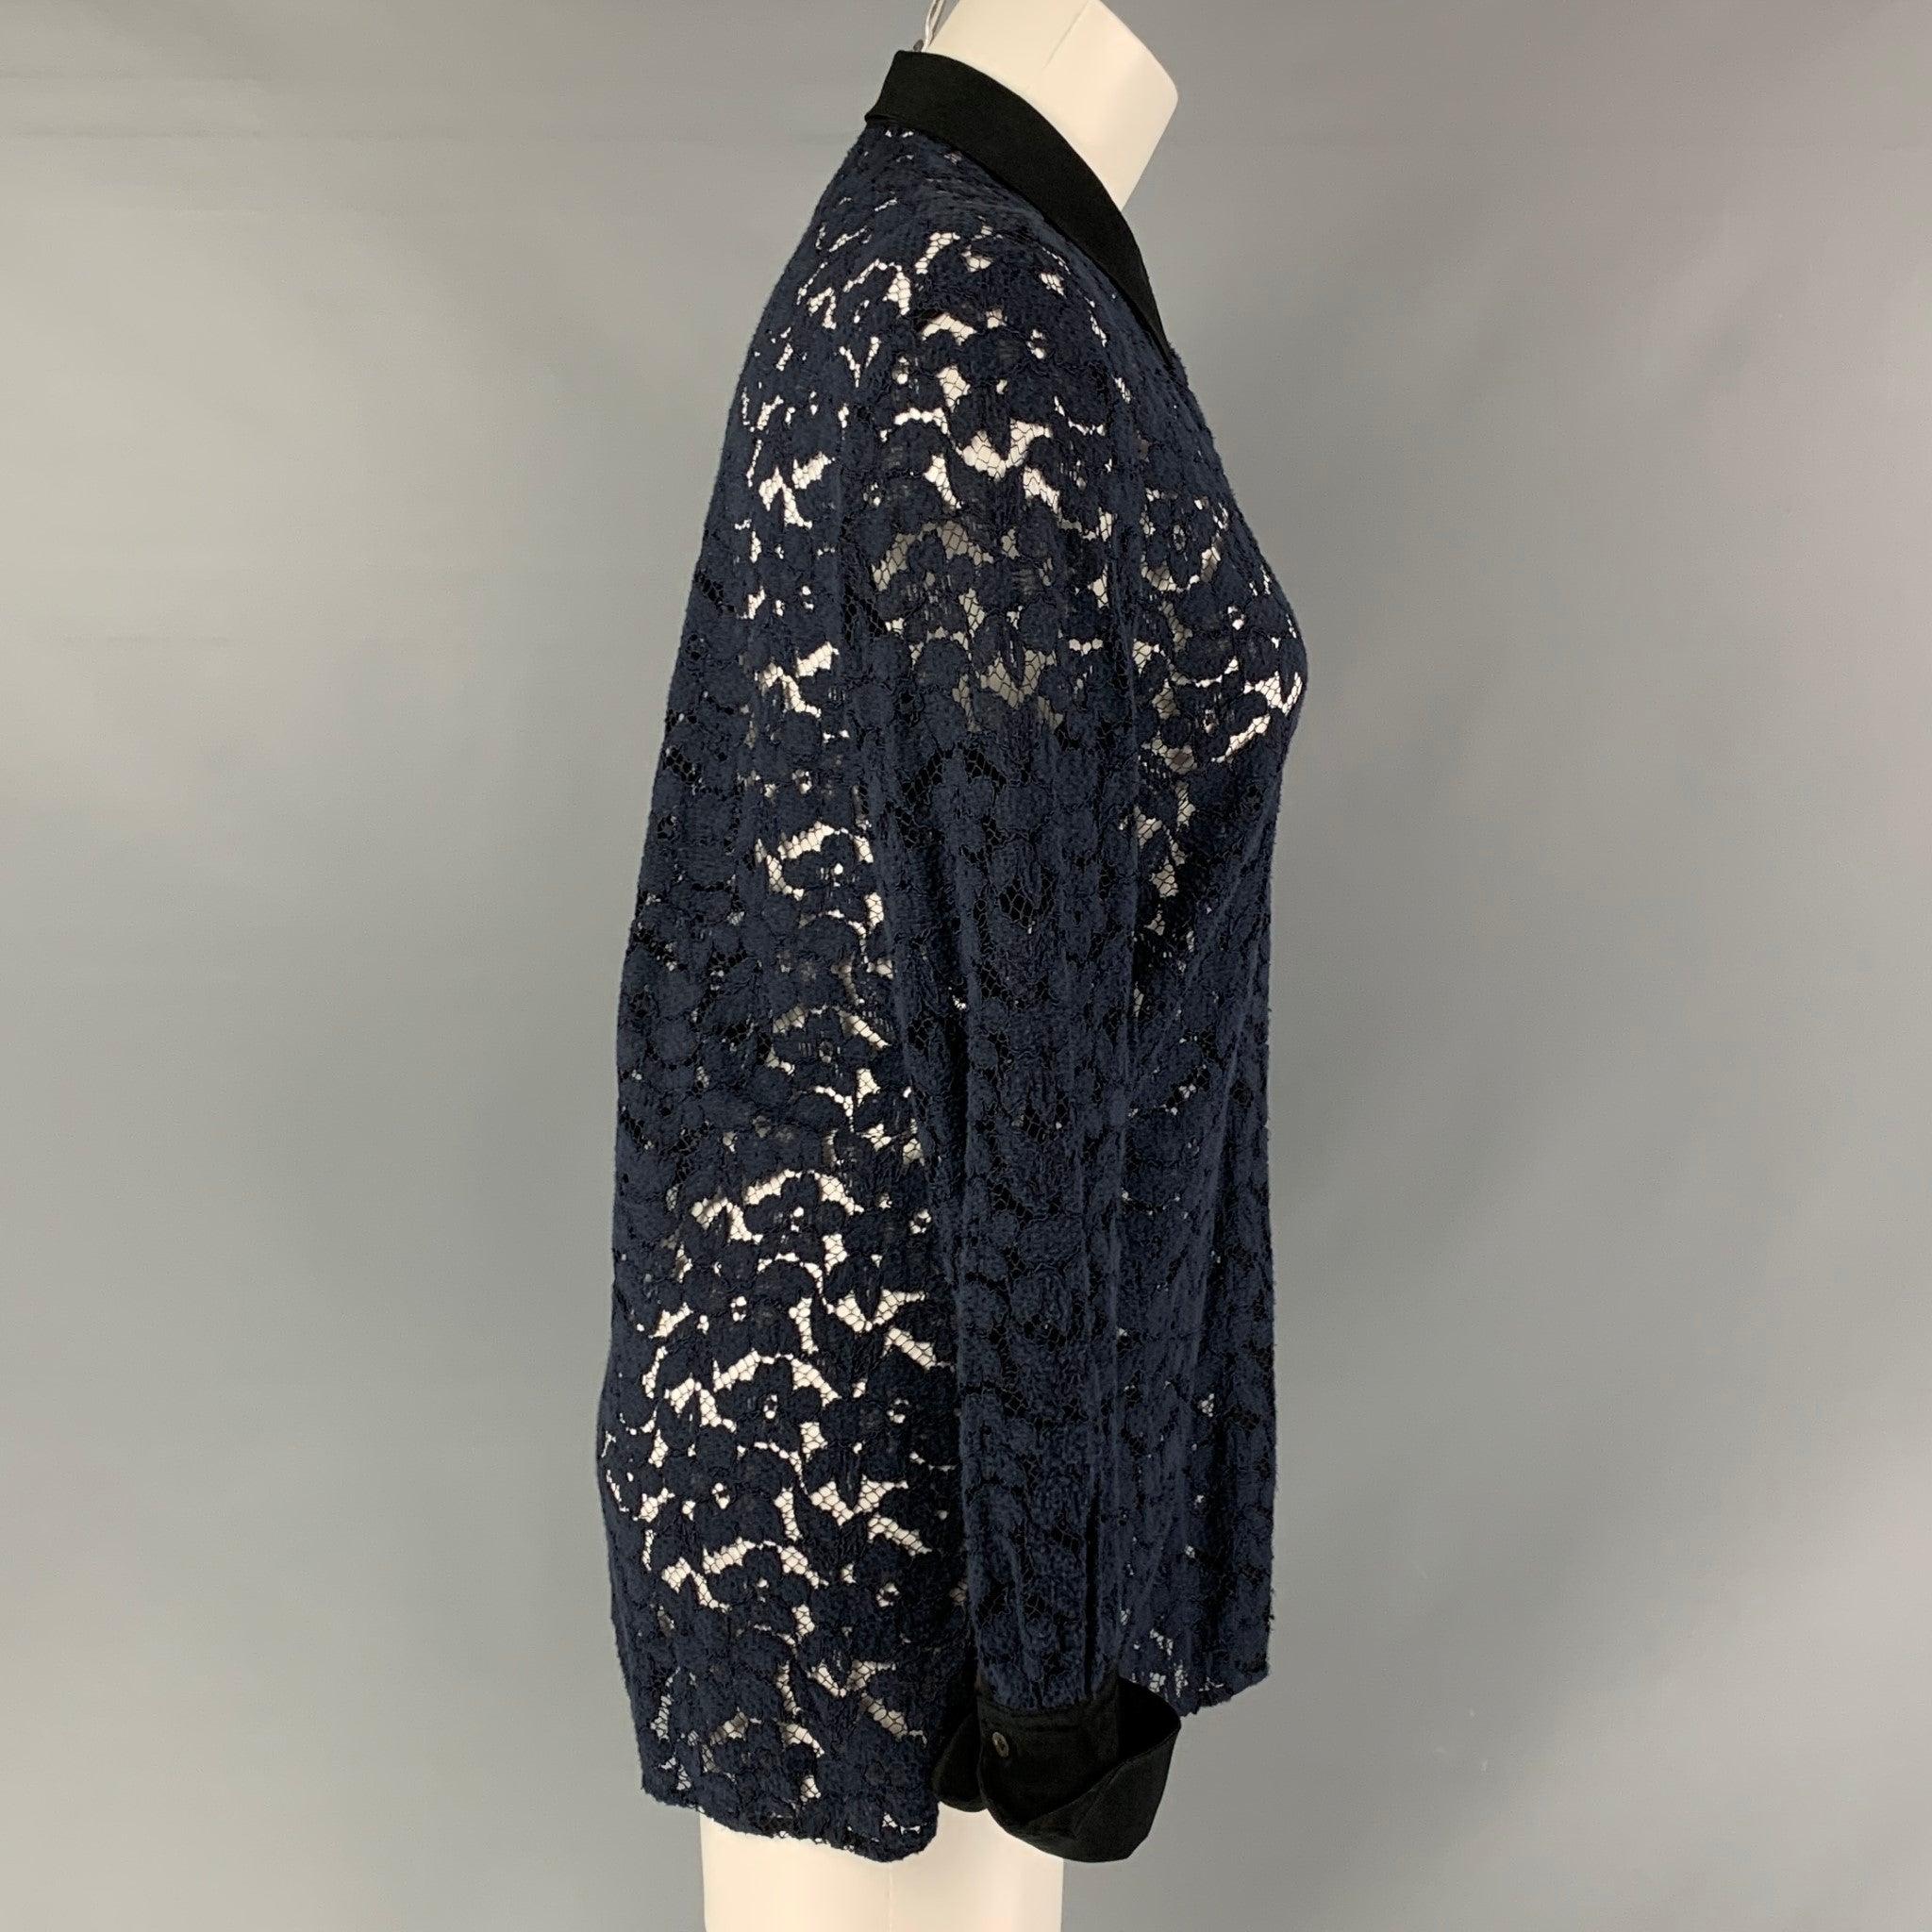 3.1 PHILLIP LIM long sleeves shirt comes in navy lace featuring a straight collar, hidden placket, and button down closure.Excellent Pre-Owned Condition.  

Marked:   4 

Measurements: 
 
Shoulder: 16.5 inches Bust: 40 inches Sleeve: 25 inches